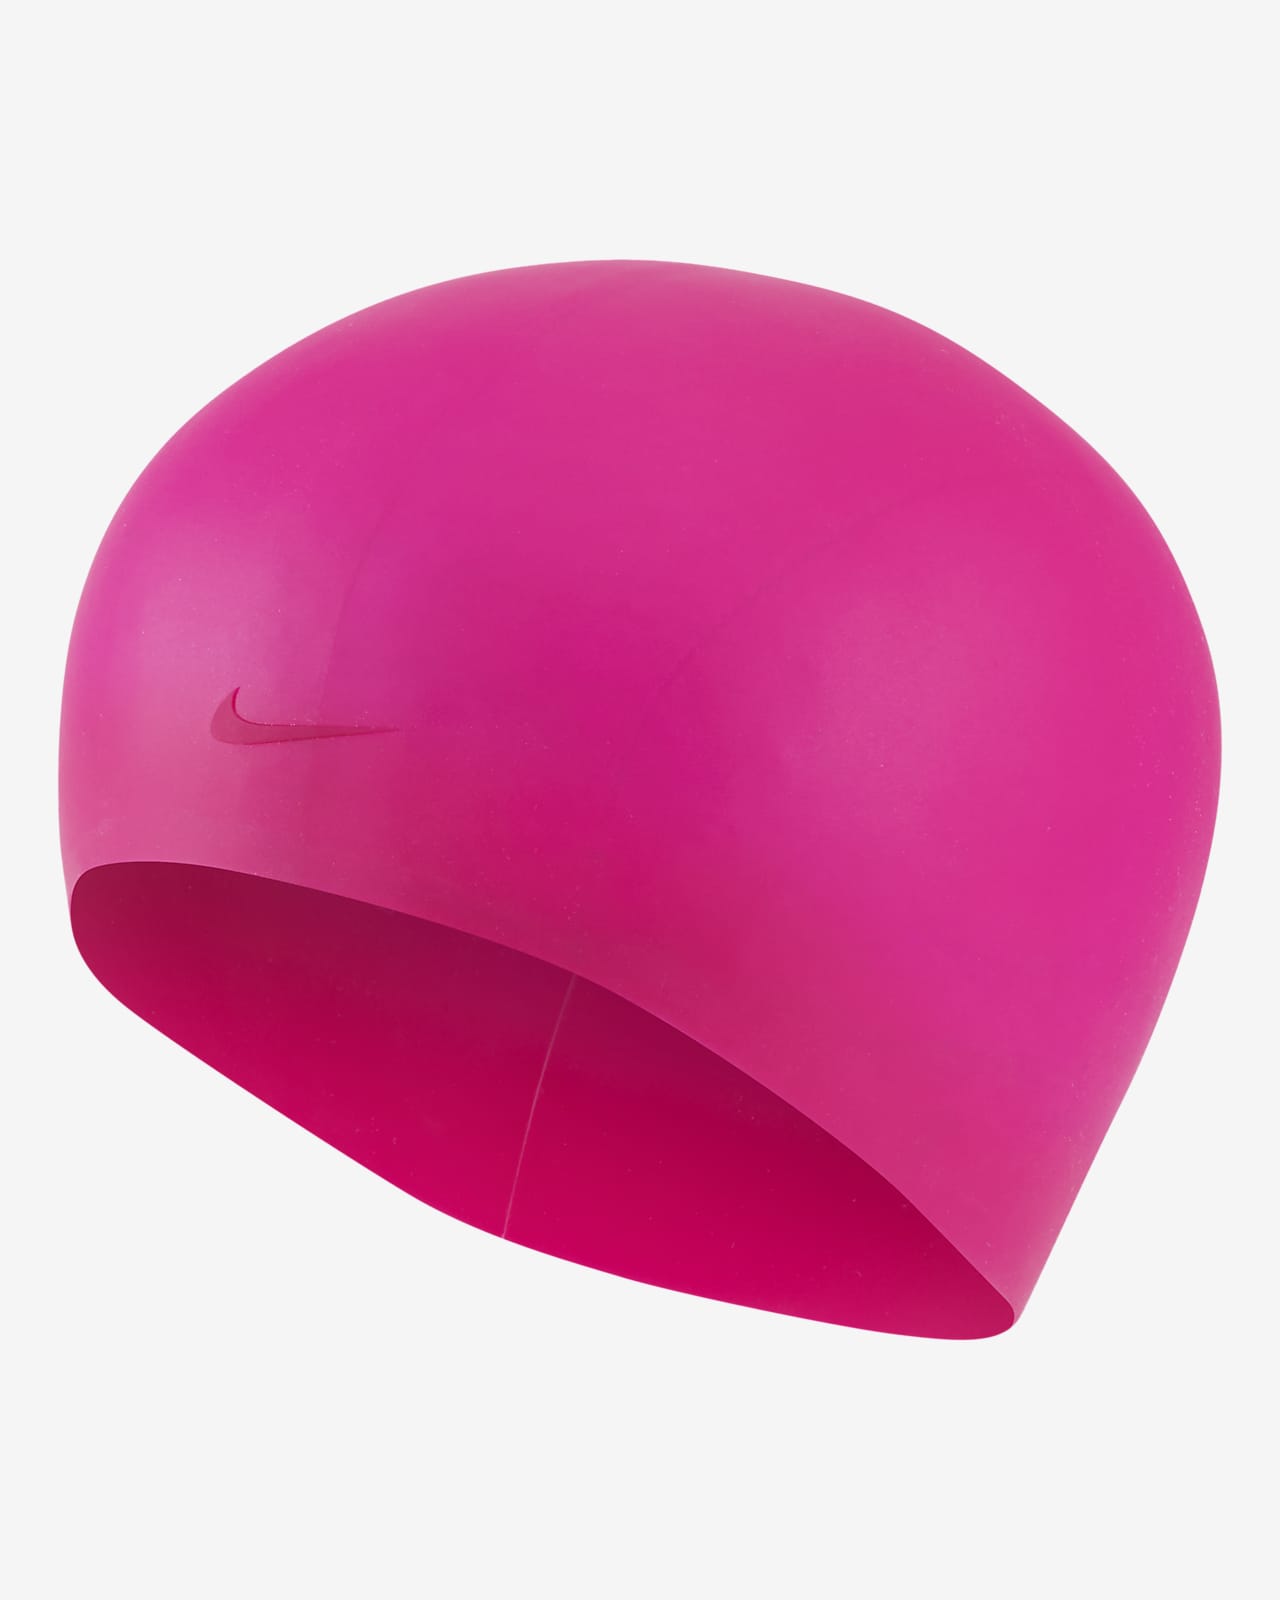 Nike Solid Long Hair Silicone Training Cap. 